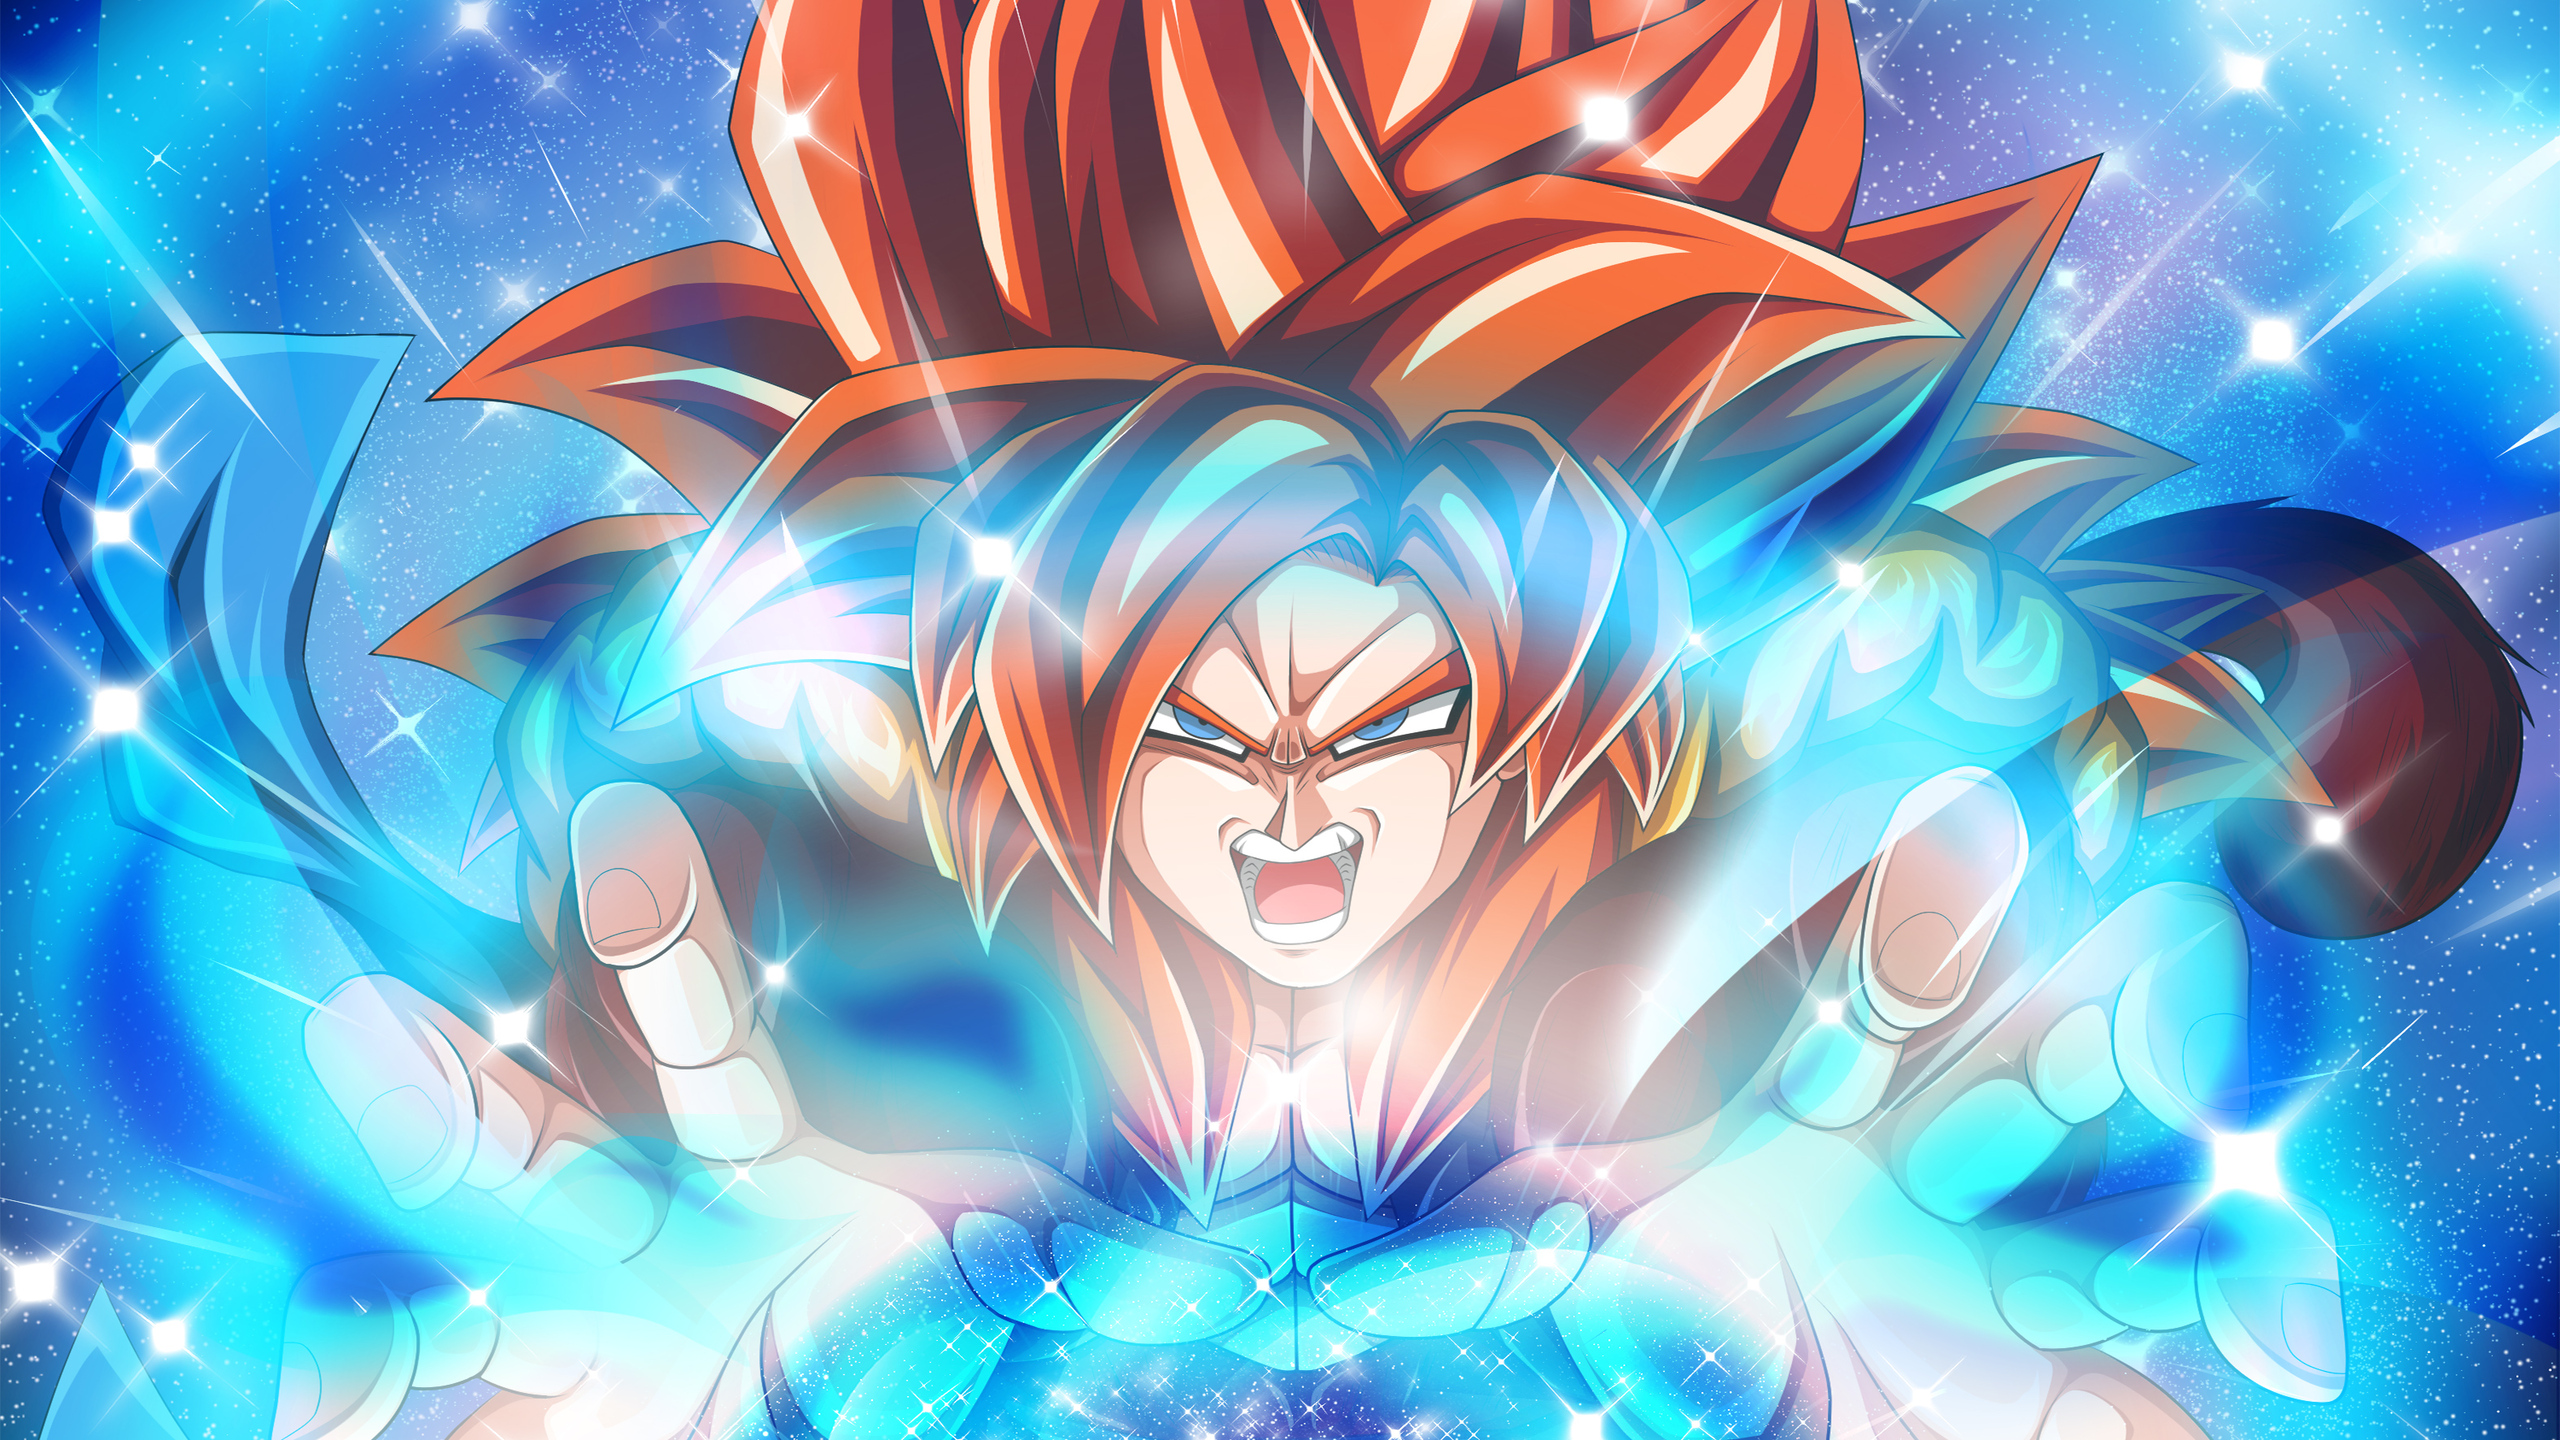 X dragon ball super saiyan anime k p resolution hd k wallpapers images backgrounds photos and pictures